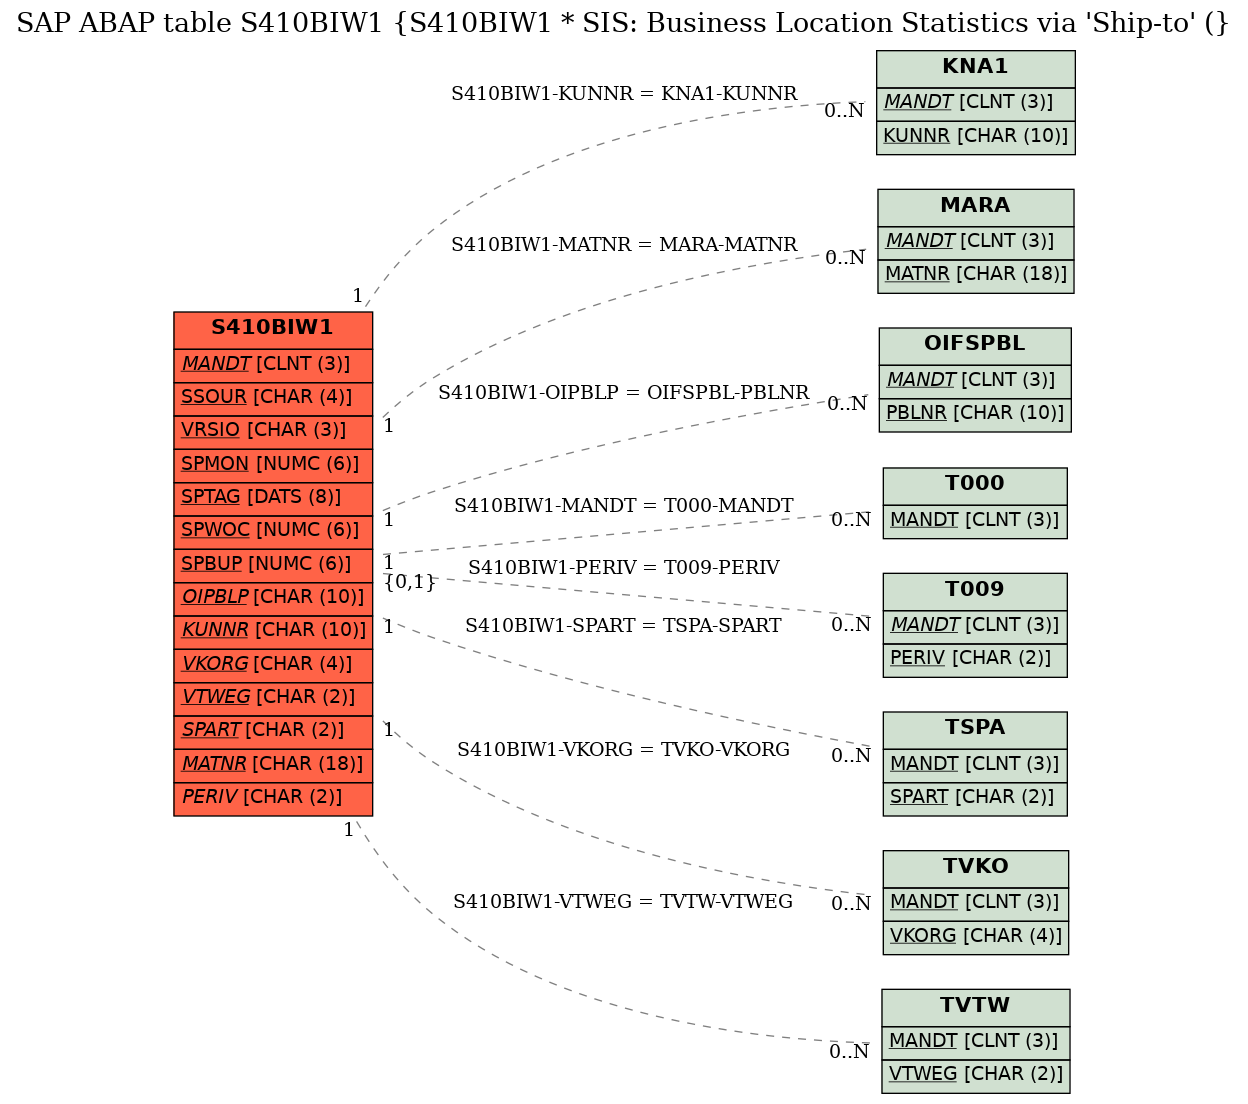 E-R Diagram for table S410BIW1 (S410BIW1 * SIS: Business Location Statistics via 'Ship-to' ()